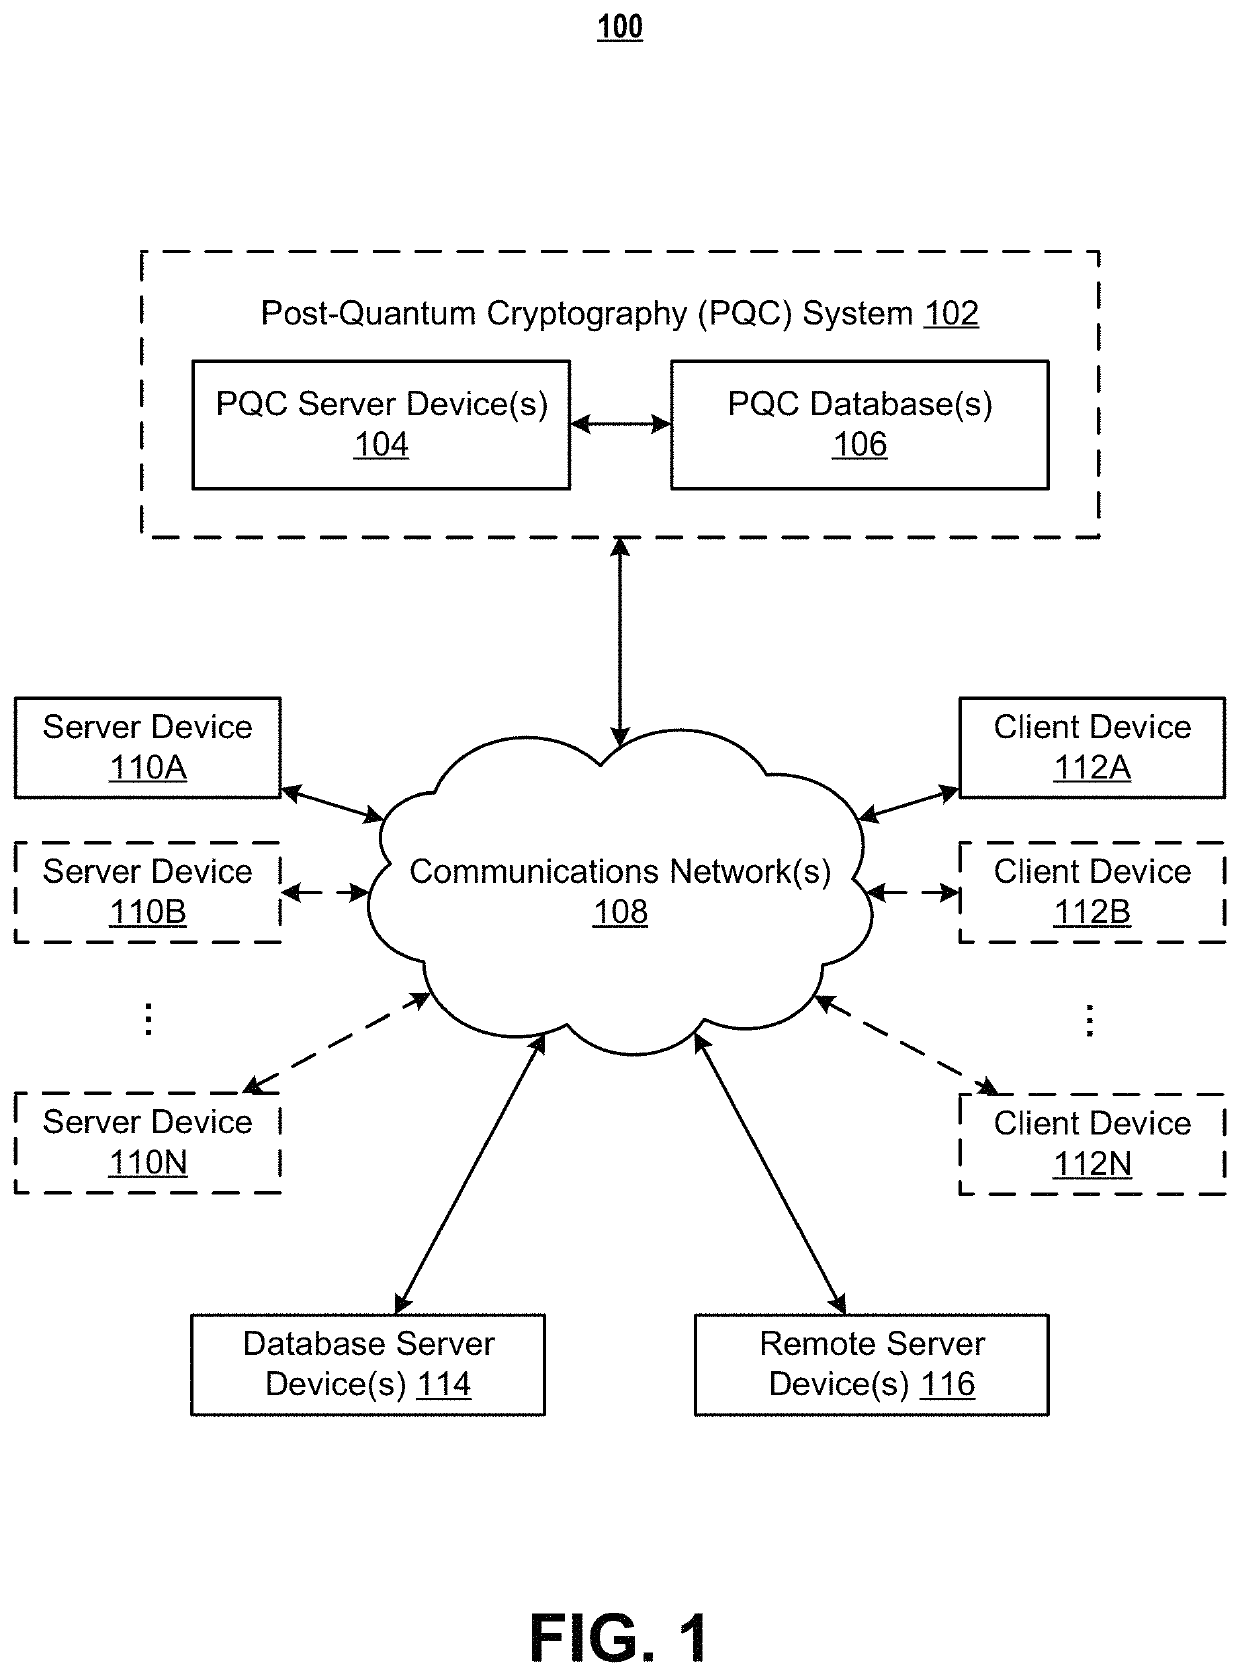 Systems and methods for post-quantum cryptography communications channels